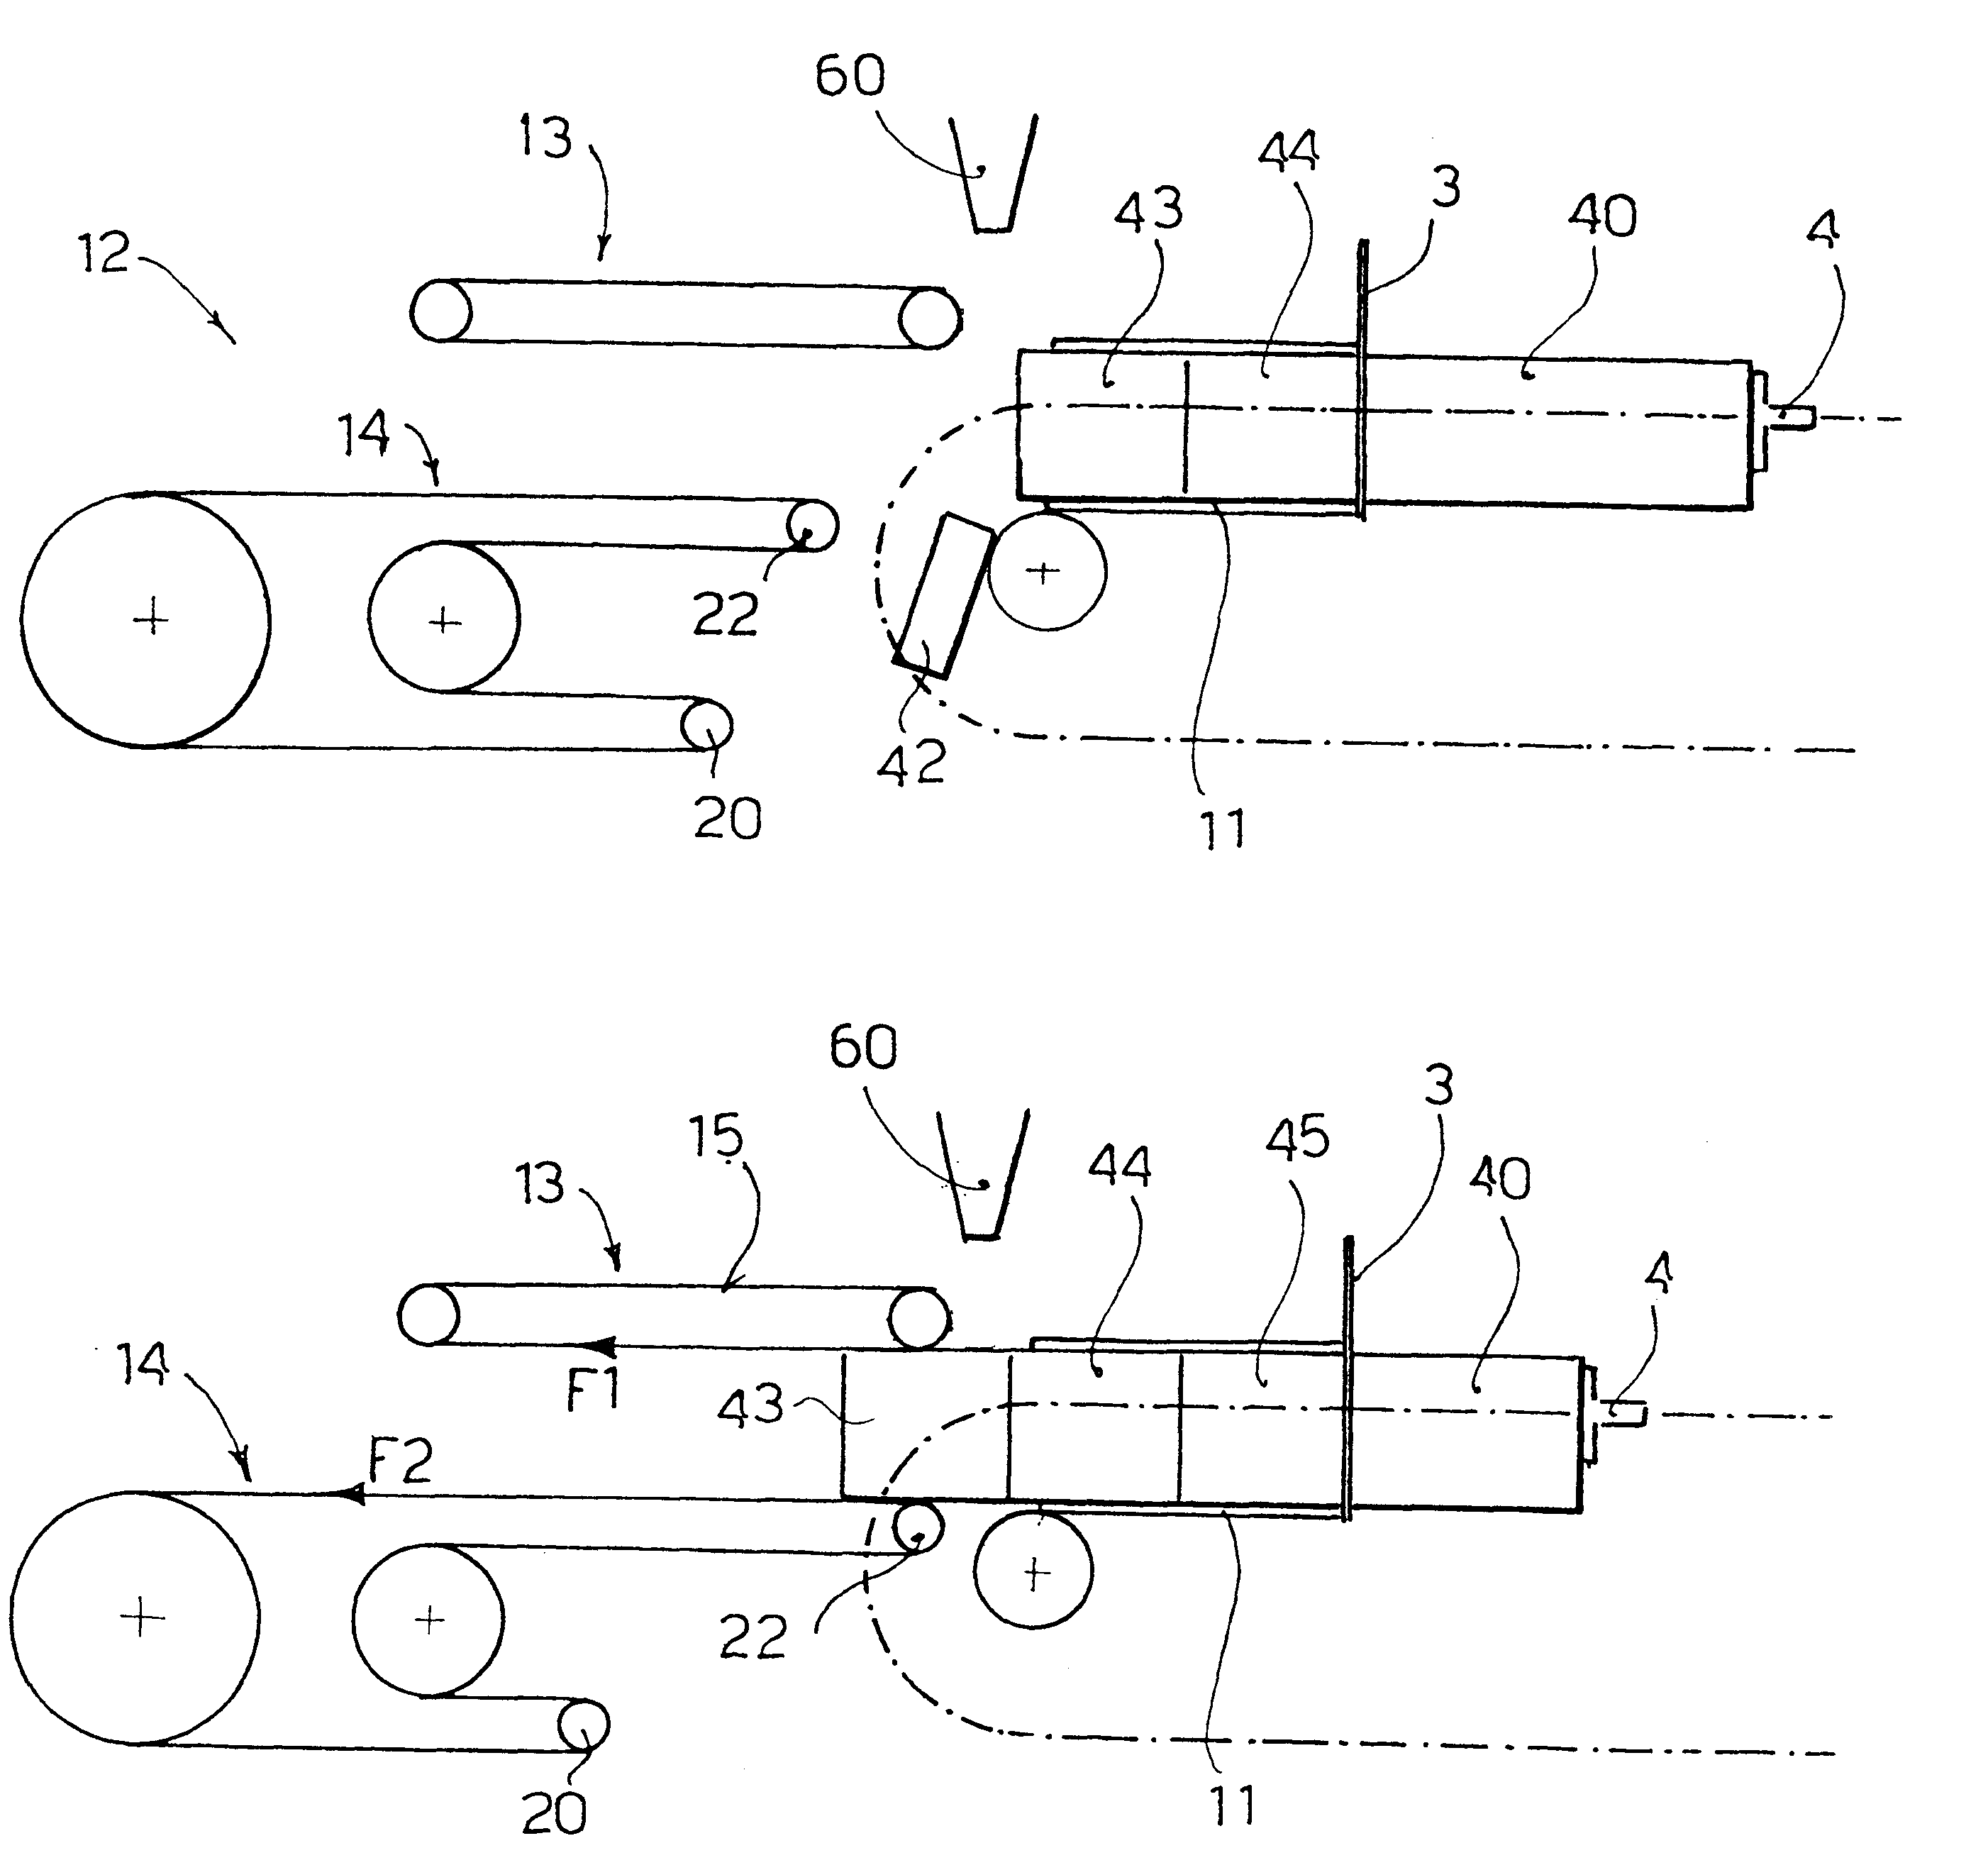 Device for removal of trimmings in the production of rolls of web material